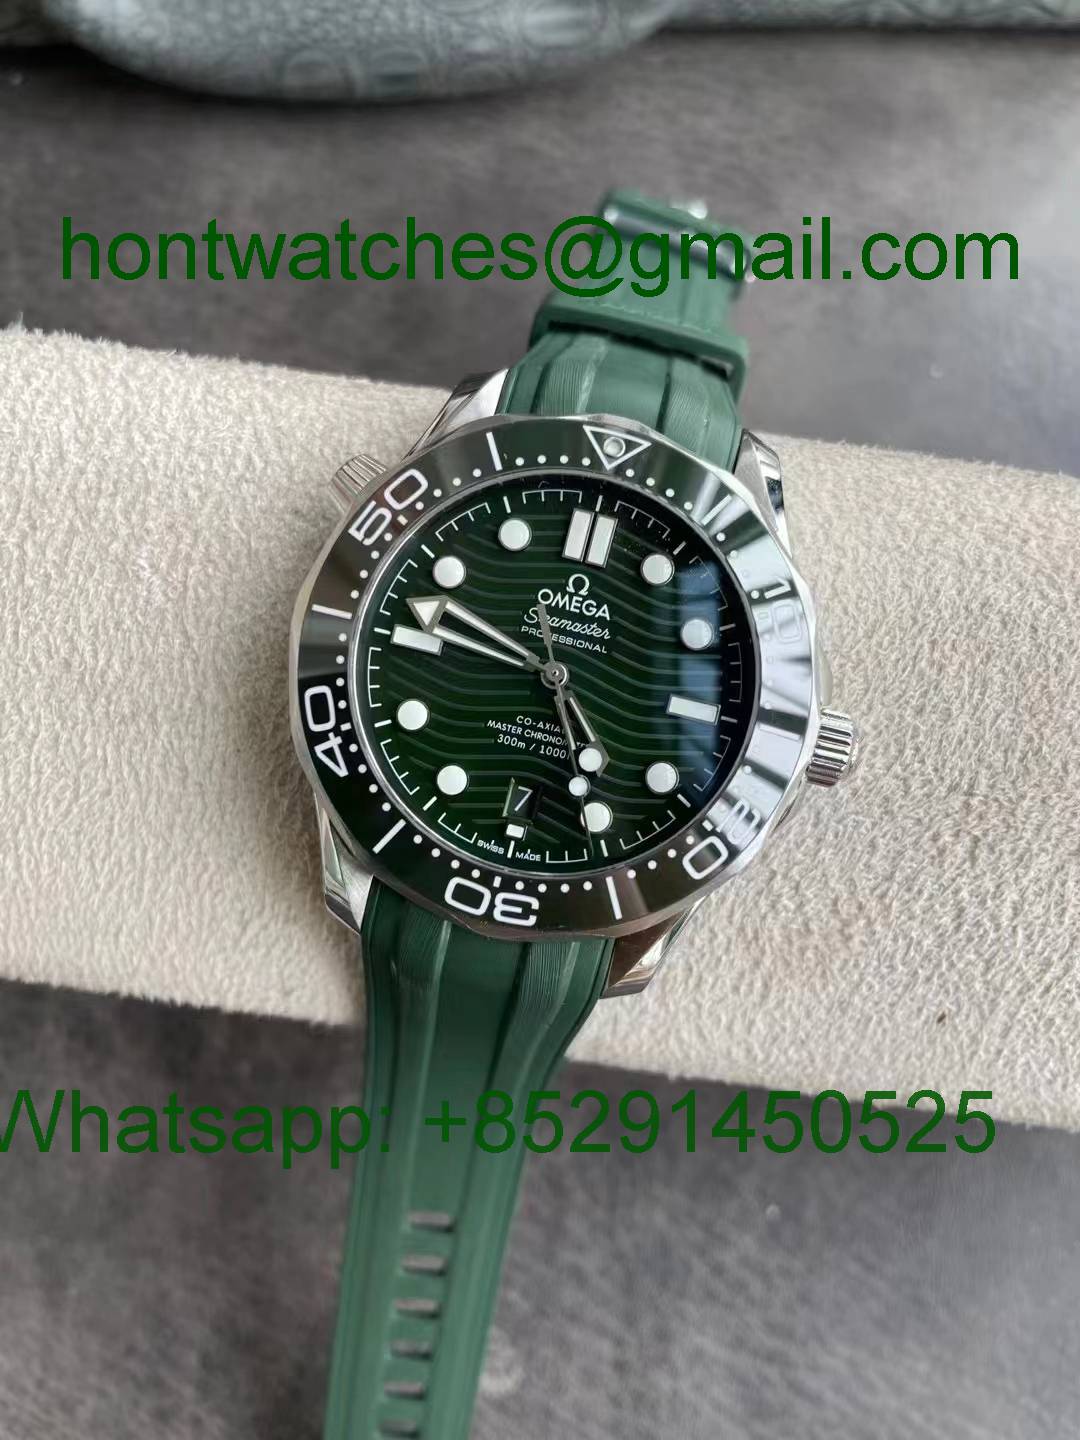 Replica OMEGA Seamaster Diver 300M VSF 1:1 Best Green Dial Rubber V2 Hontwatch Wholesale